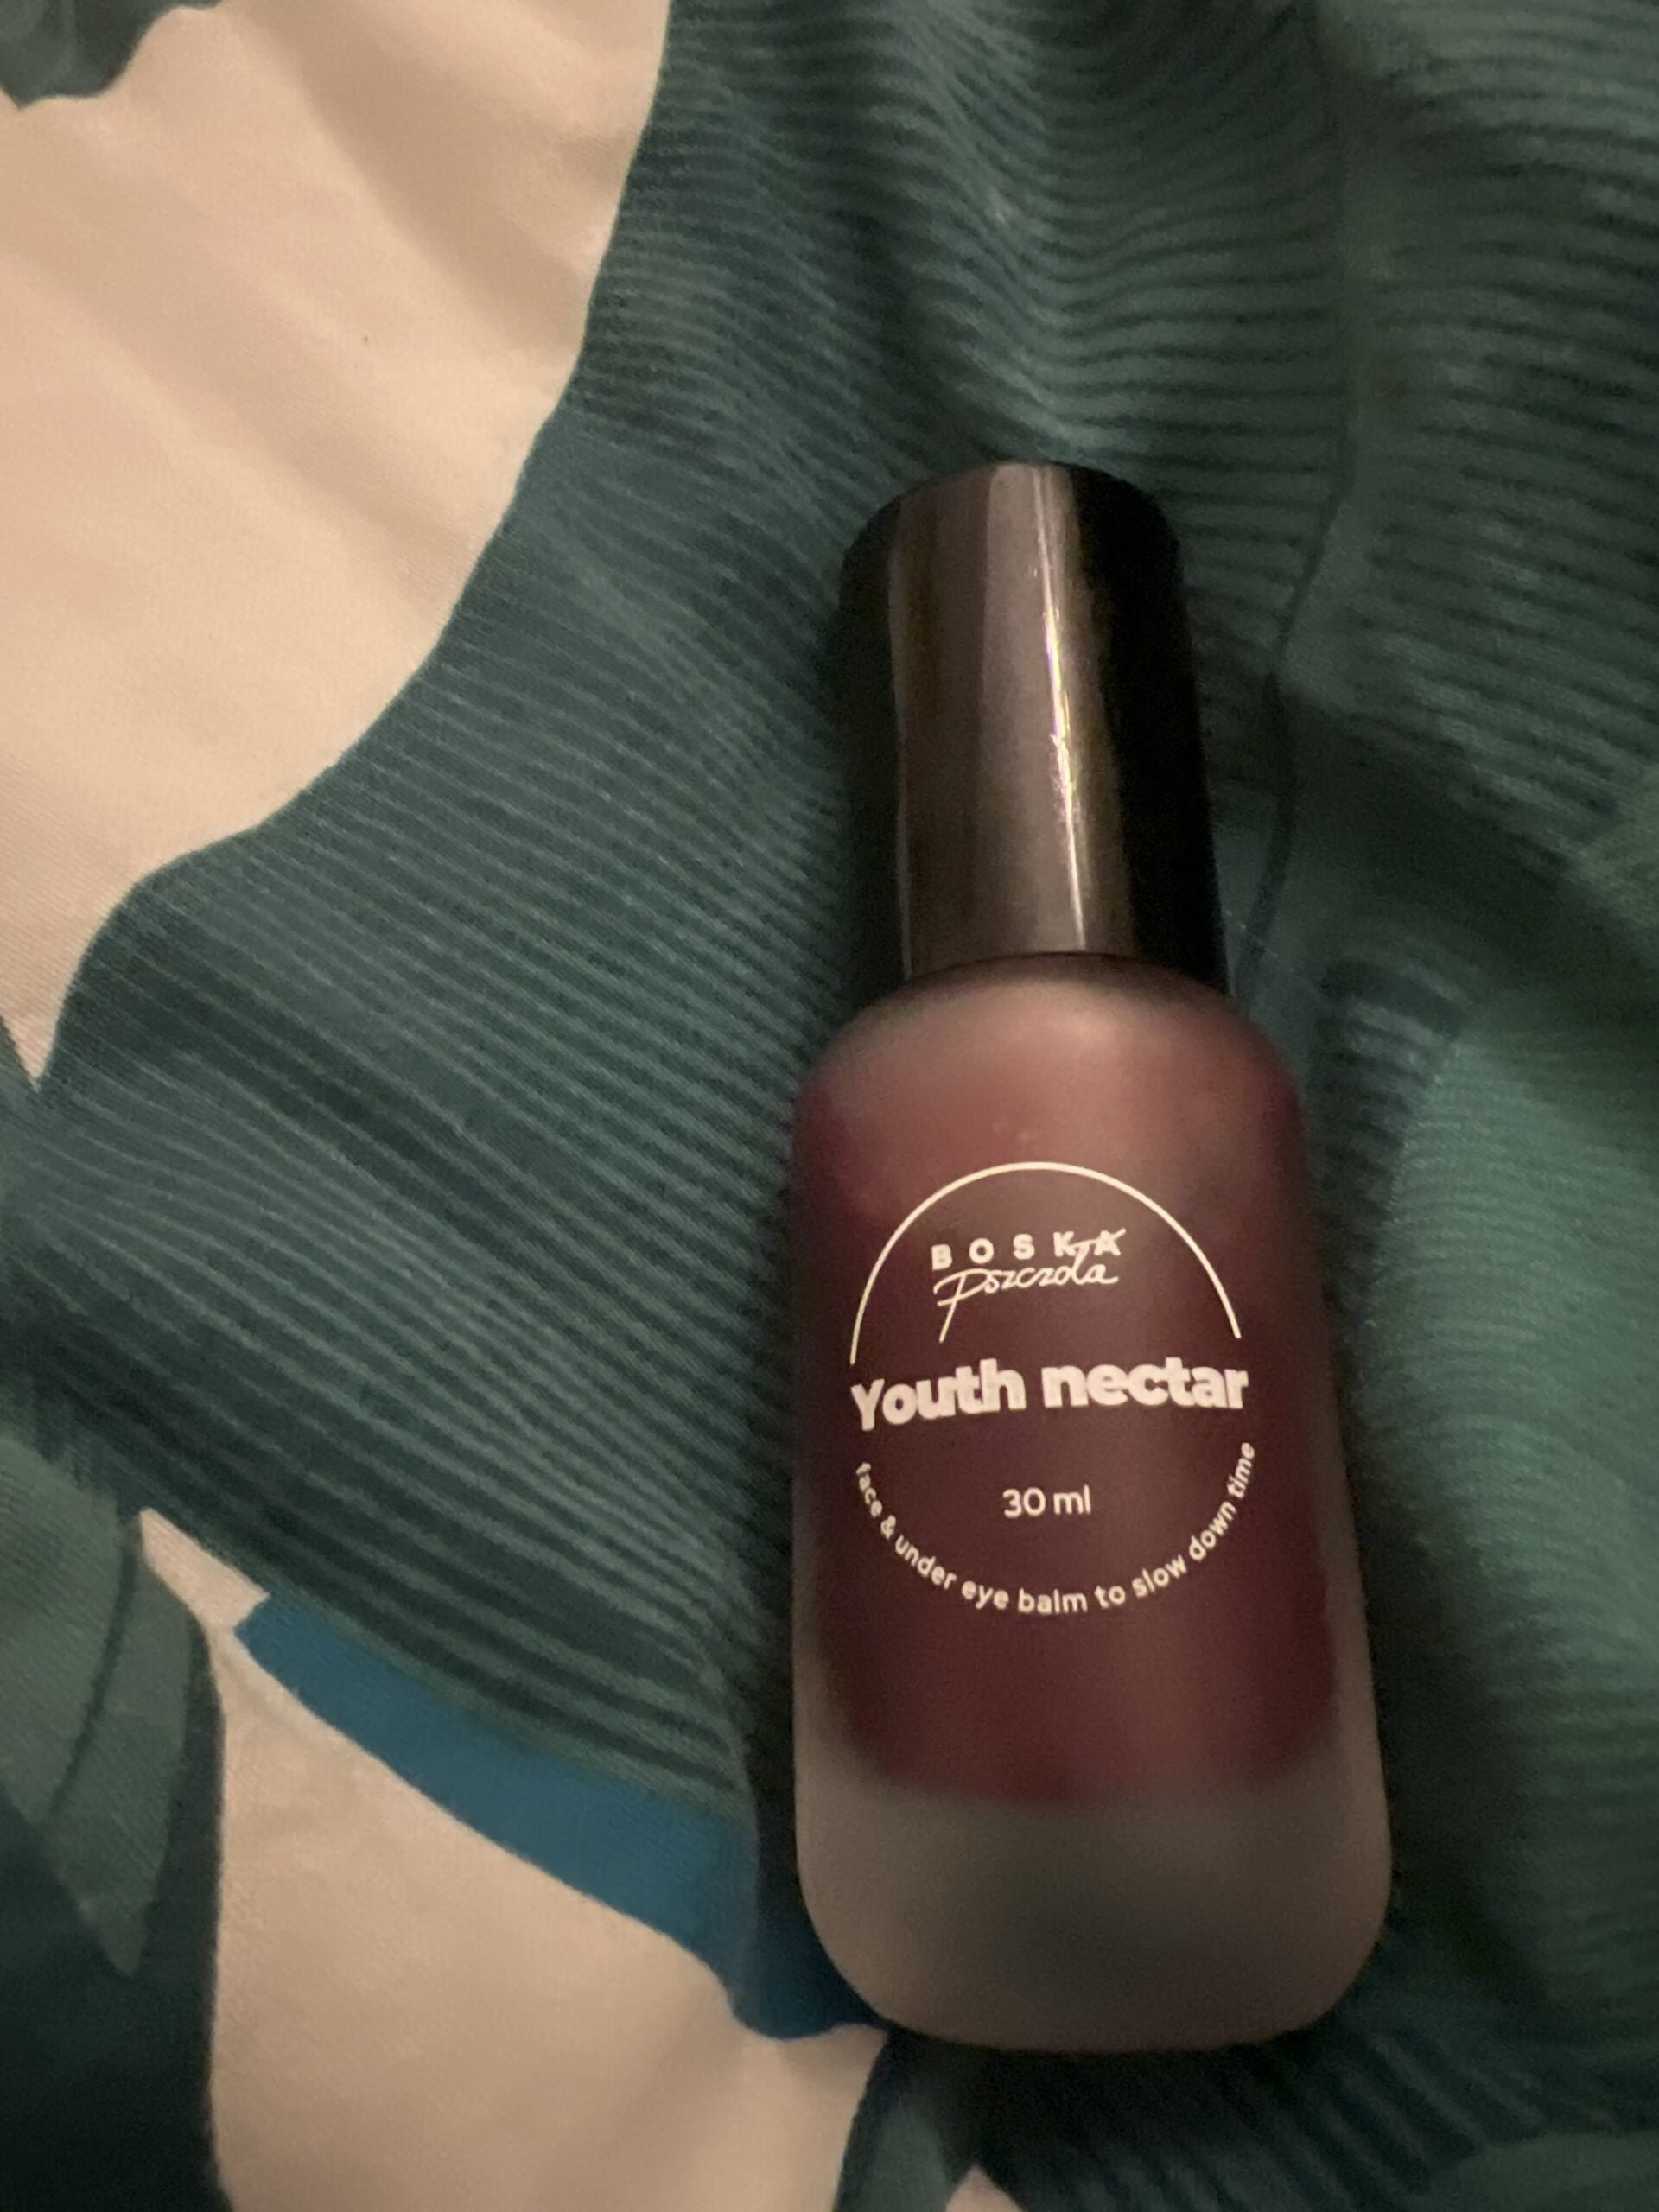 Youth Nectar. Face and eye serum with 1% bacchio - 30ml photo review